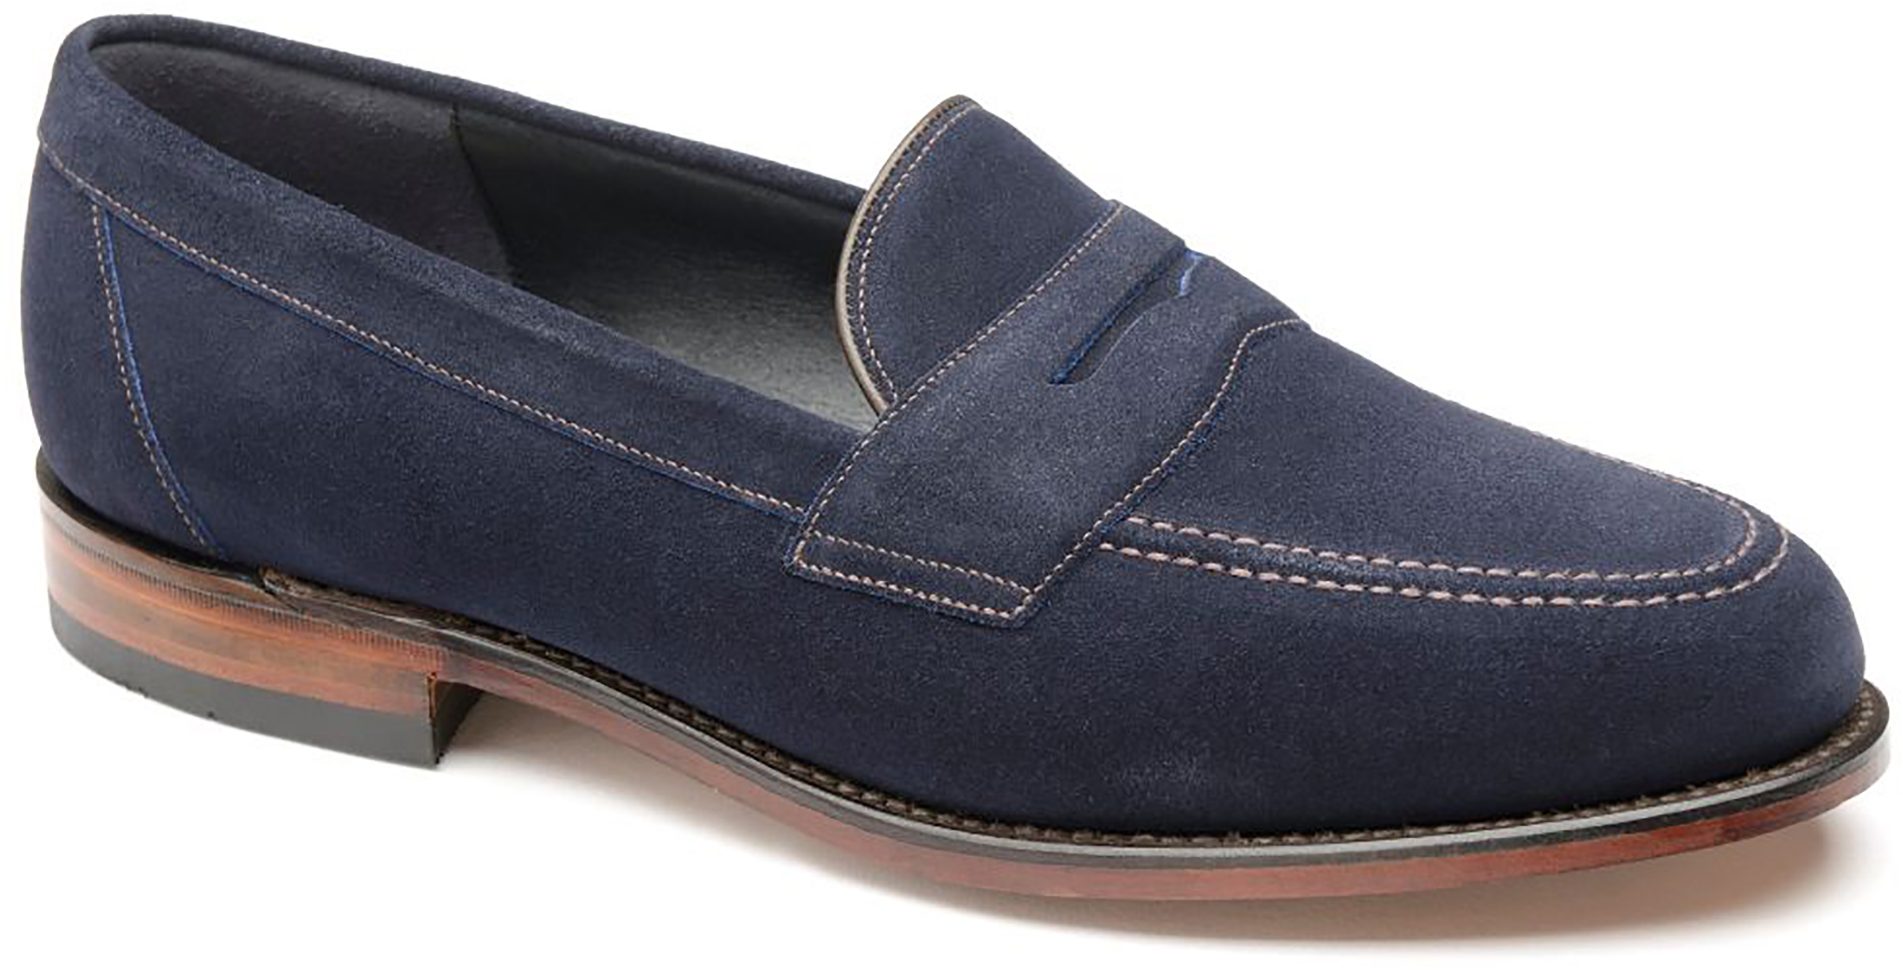 Loake Eton Navy Suede - Formal Shoes - Humphries Shoes